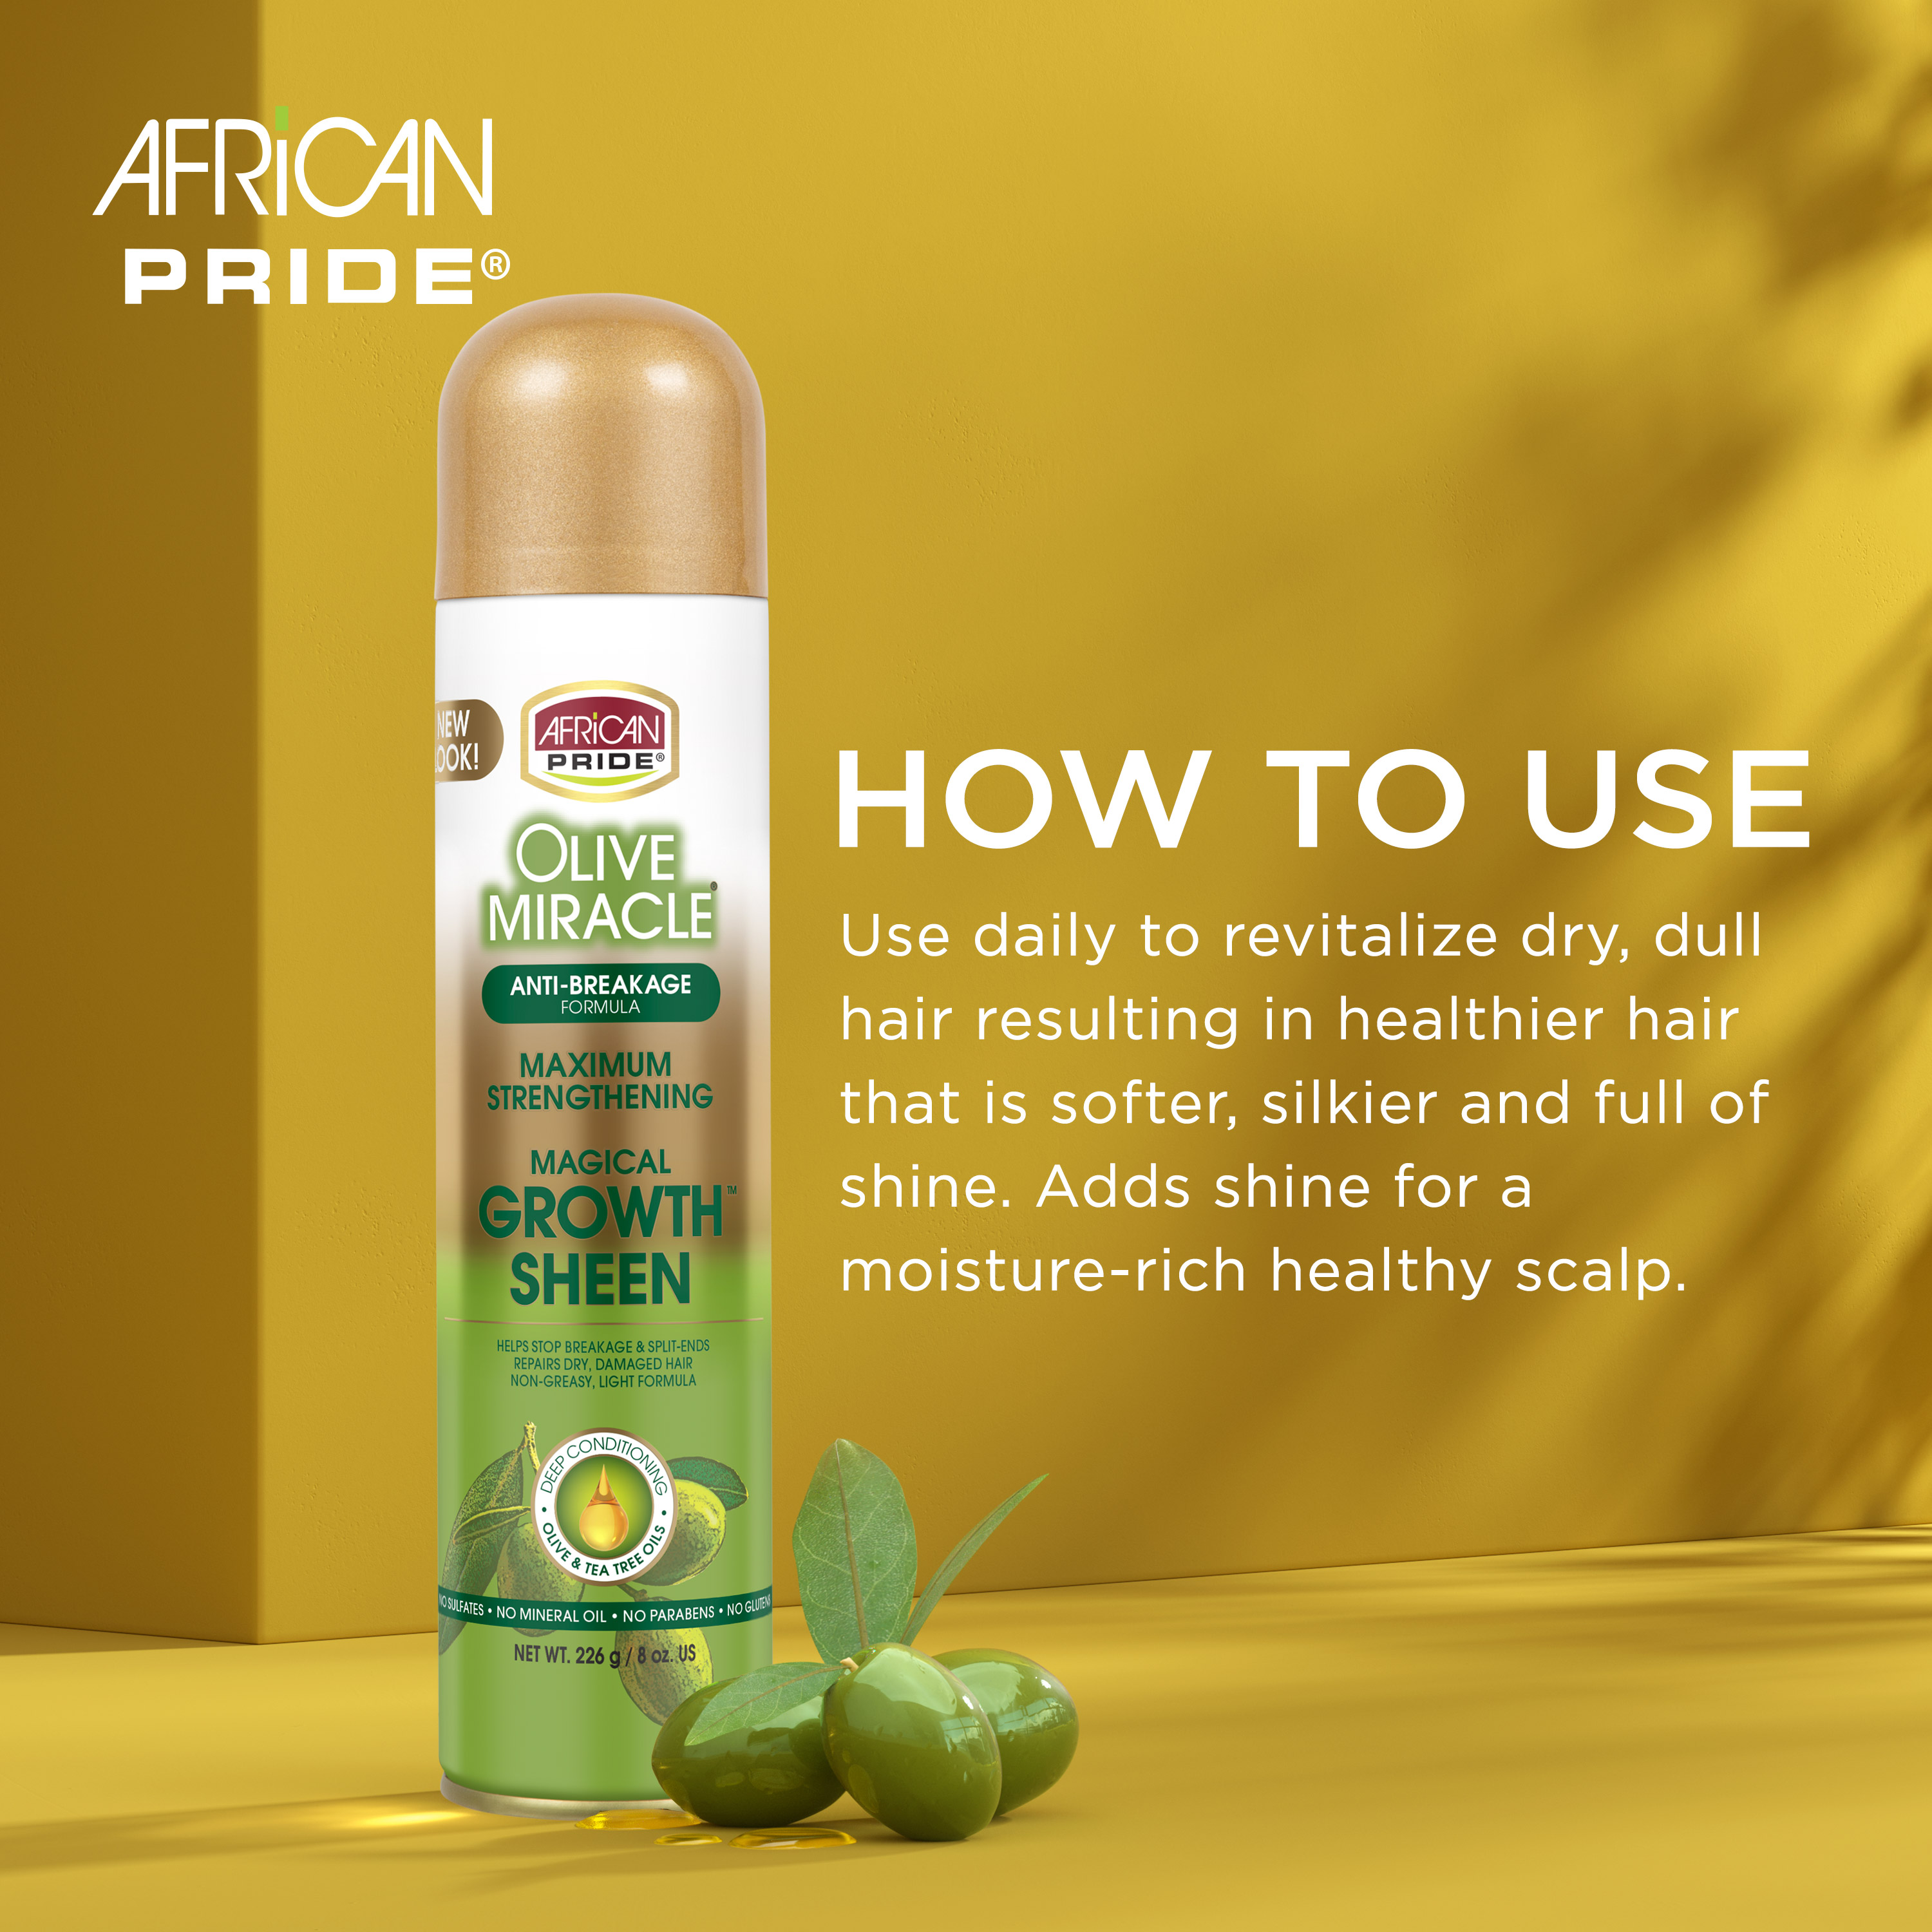 African Pride Olive Miracle Shine Enhancing Maximum Strengthening Magical Growth Sheen Hair Spray, 8 oz., Unisex - image 3 of 7